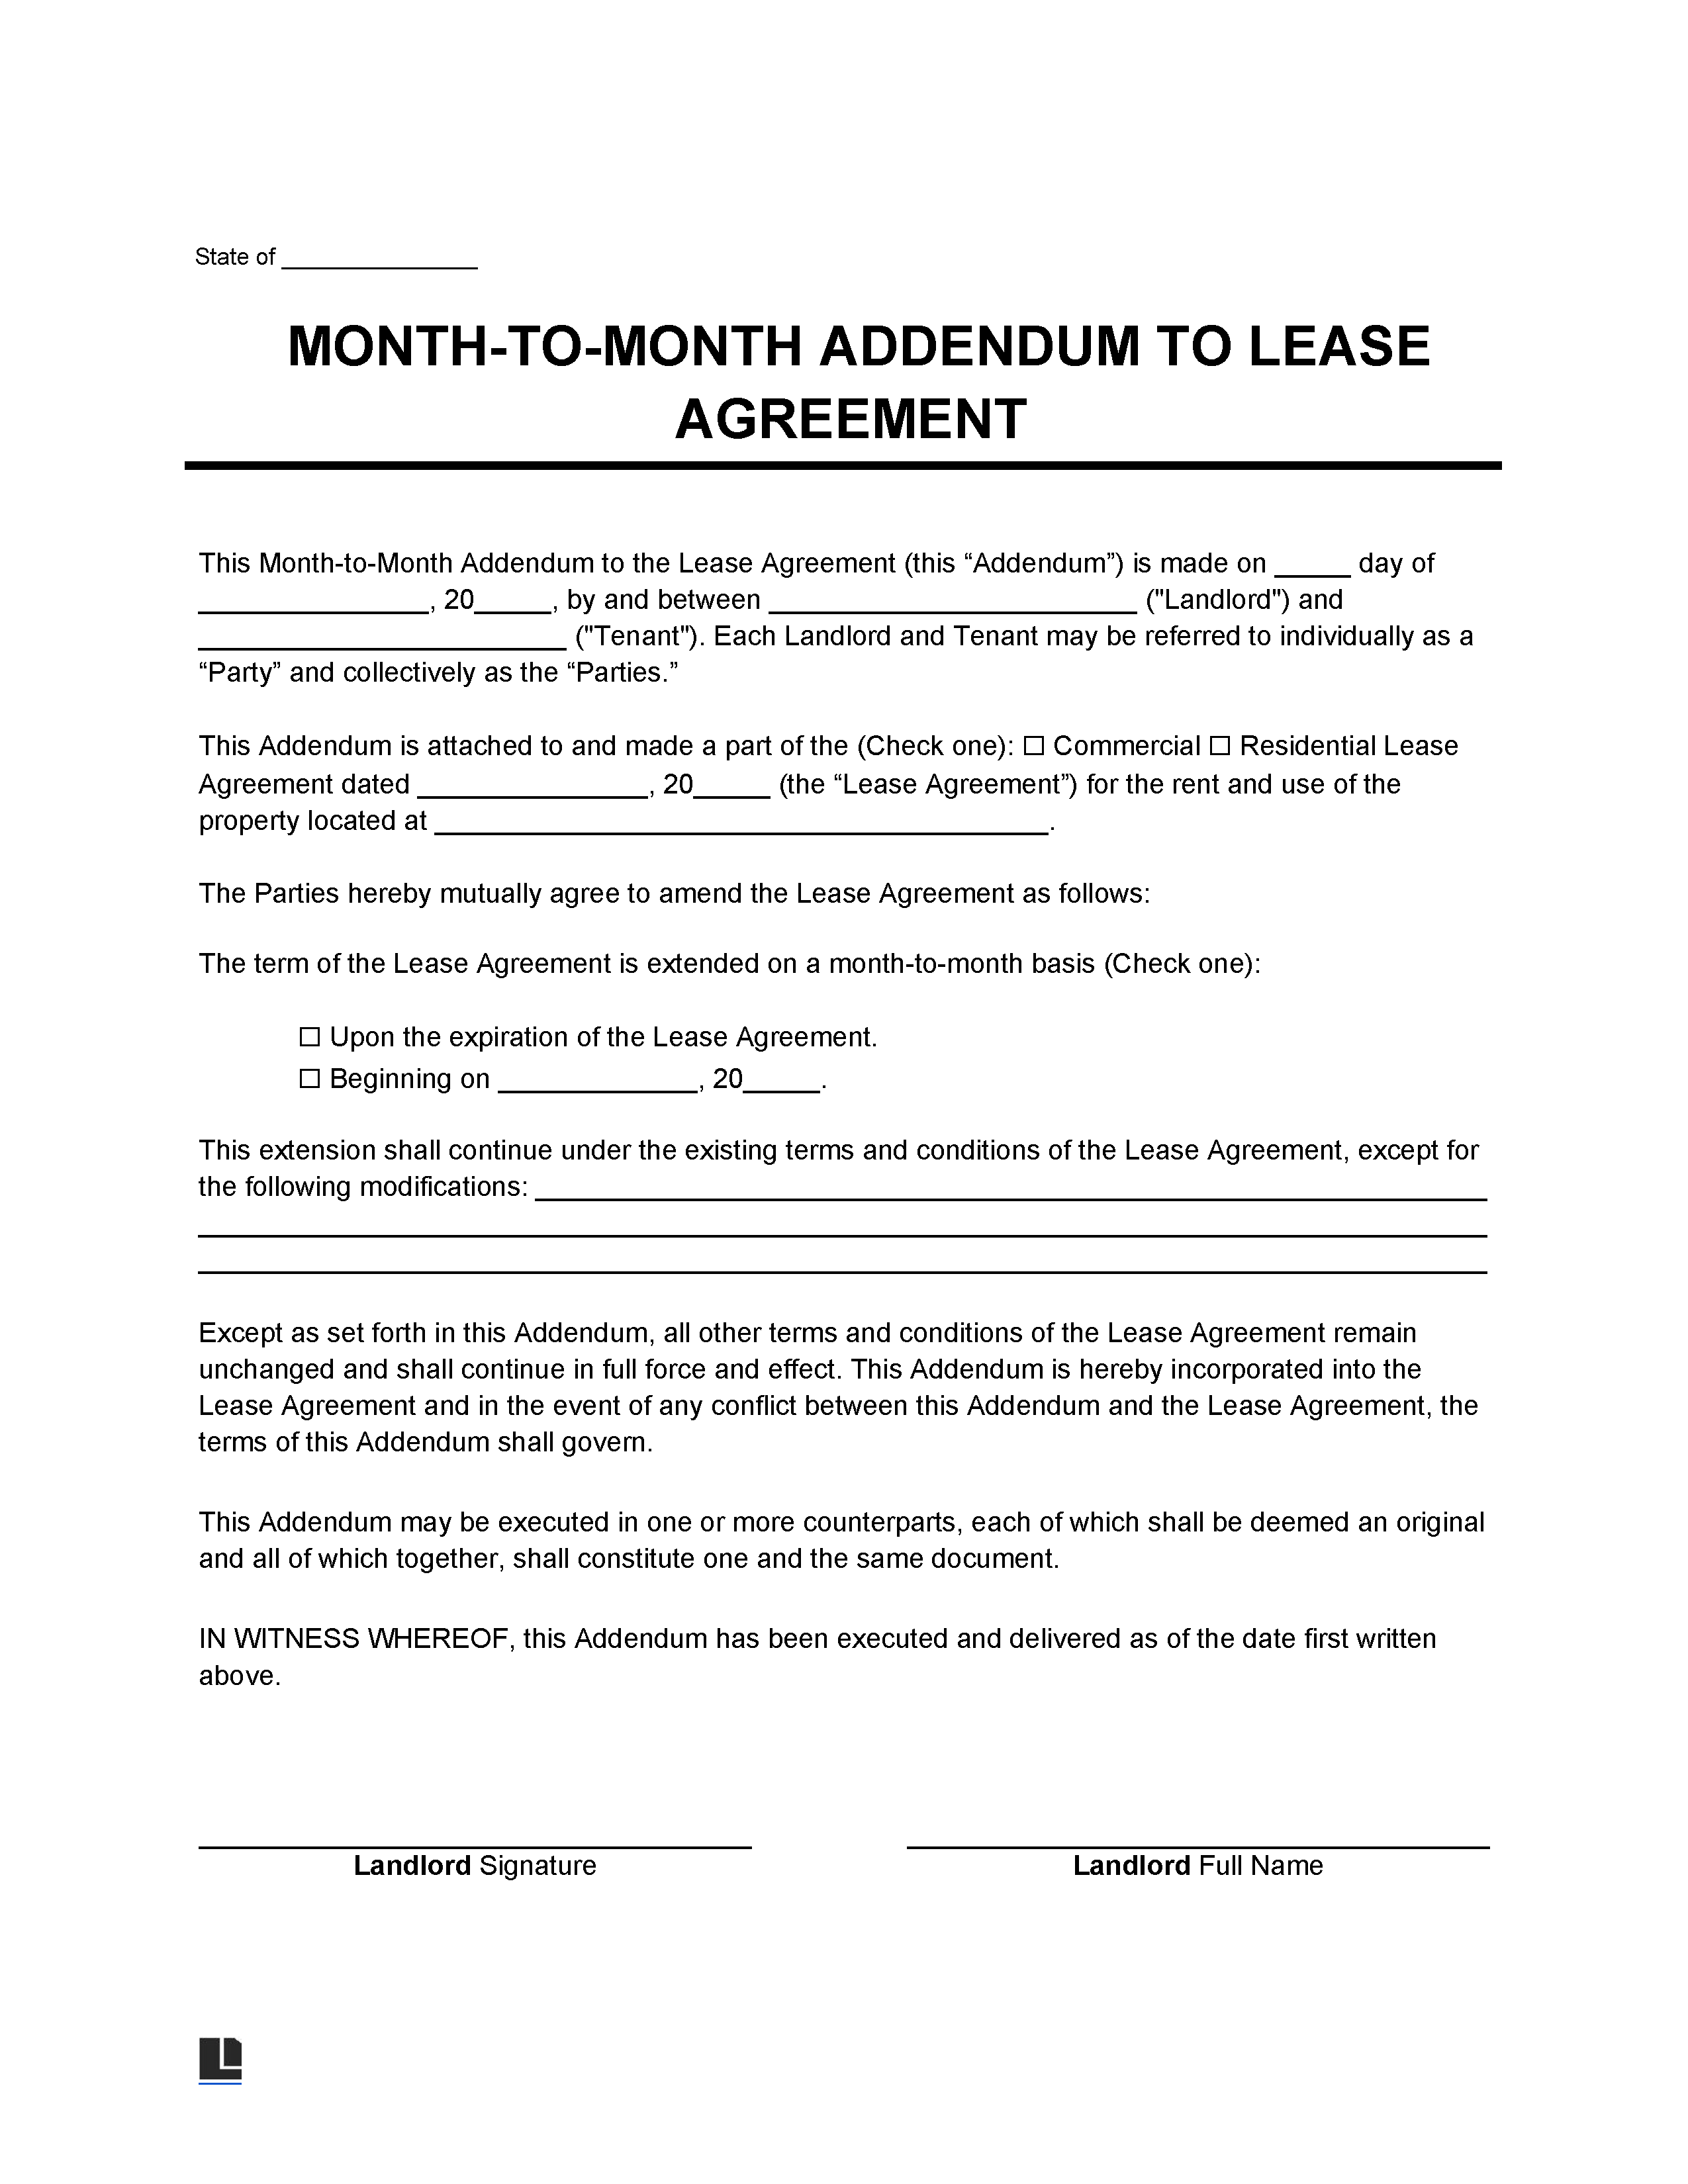 Month-To-Month Lease Agreement Addendum Template